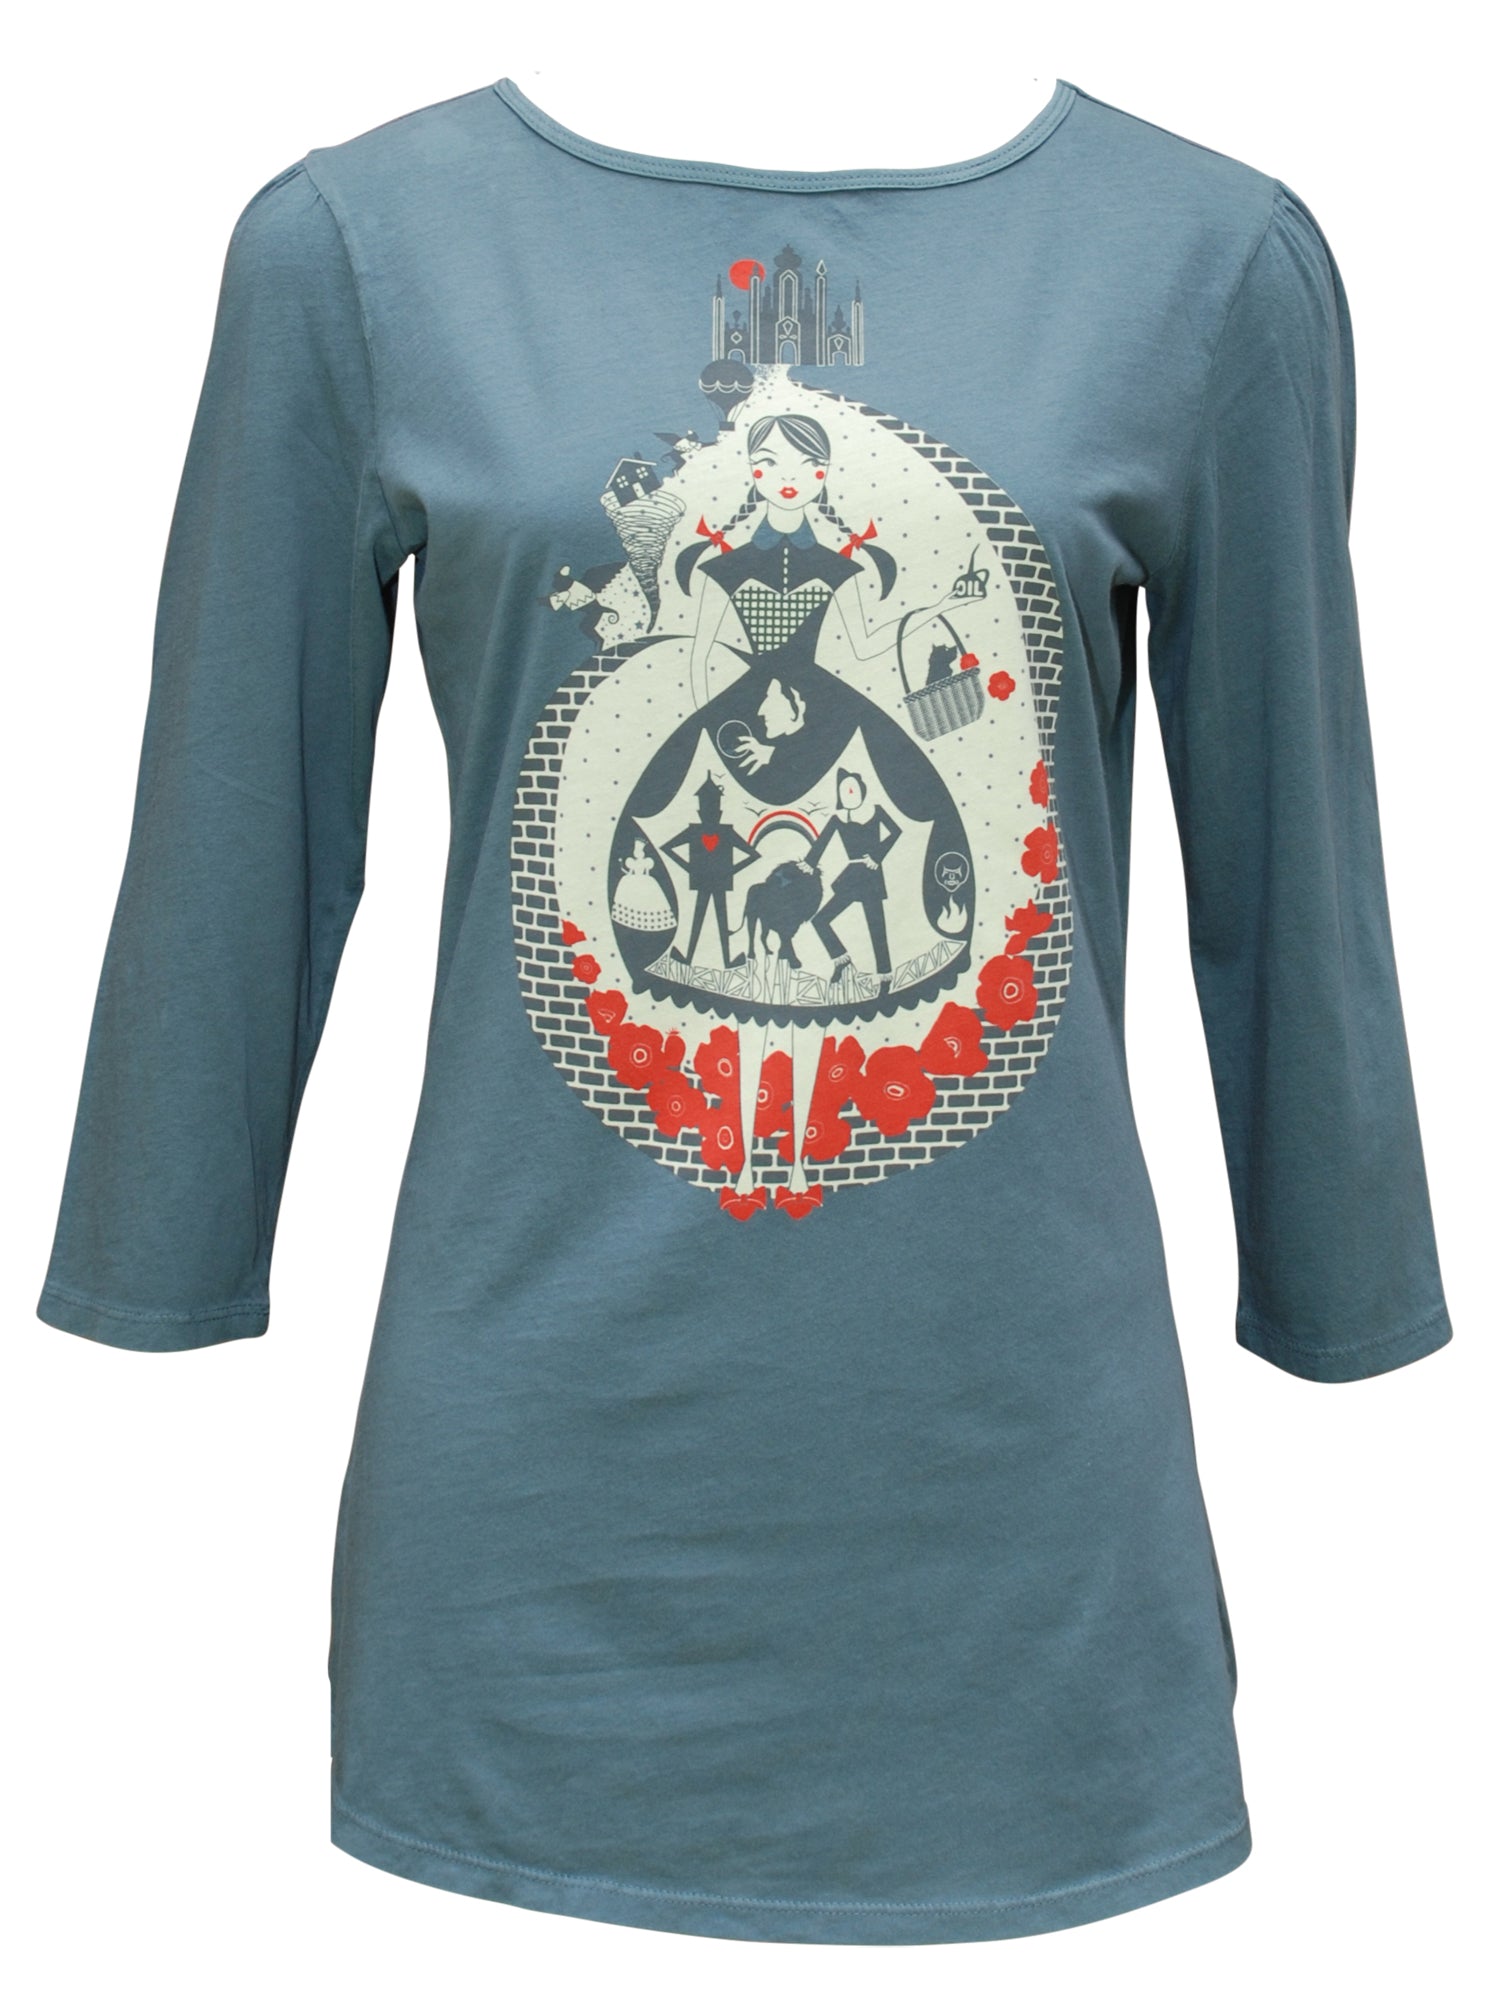 Grey 3/4 sleeve tee with graphic of Dorothy, poppies, a dog, scarecrow, tin man and tornado in red and off white